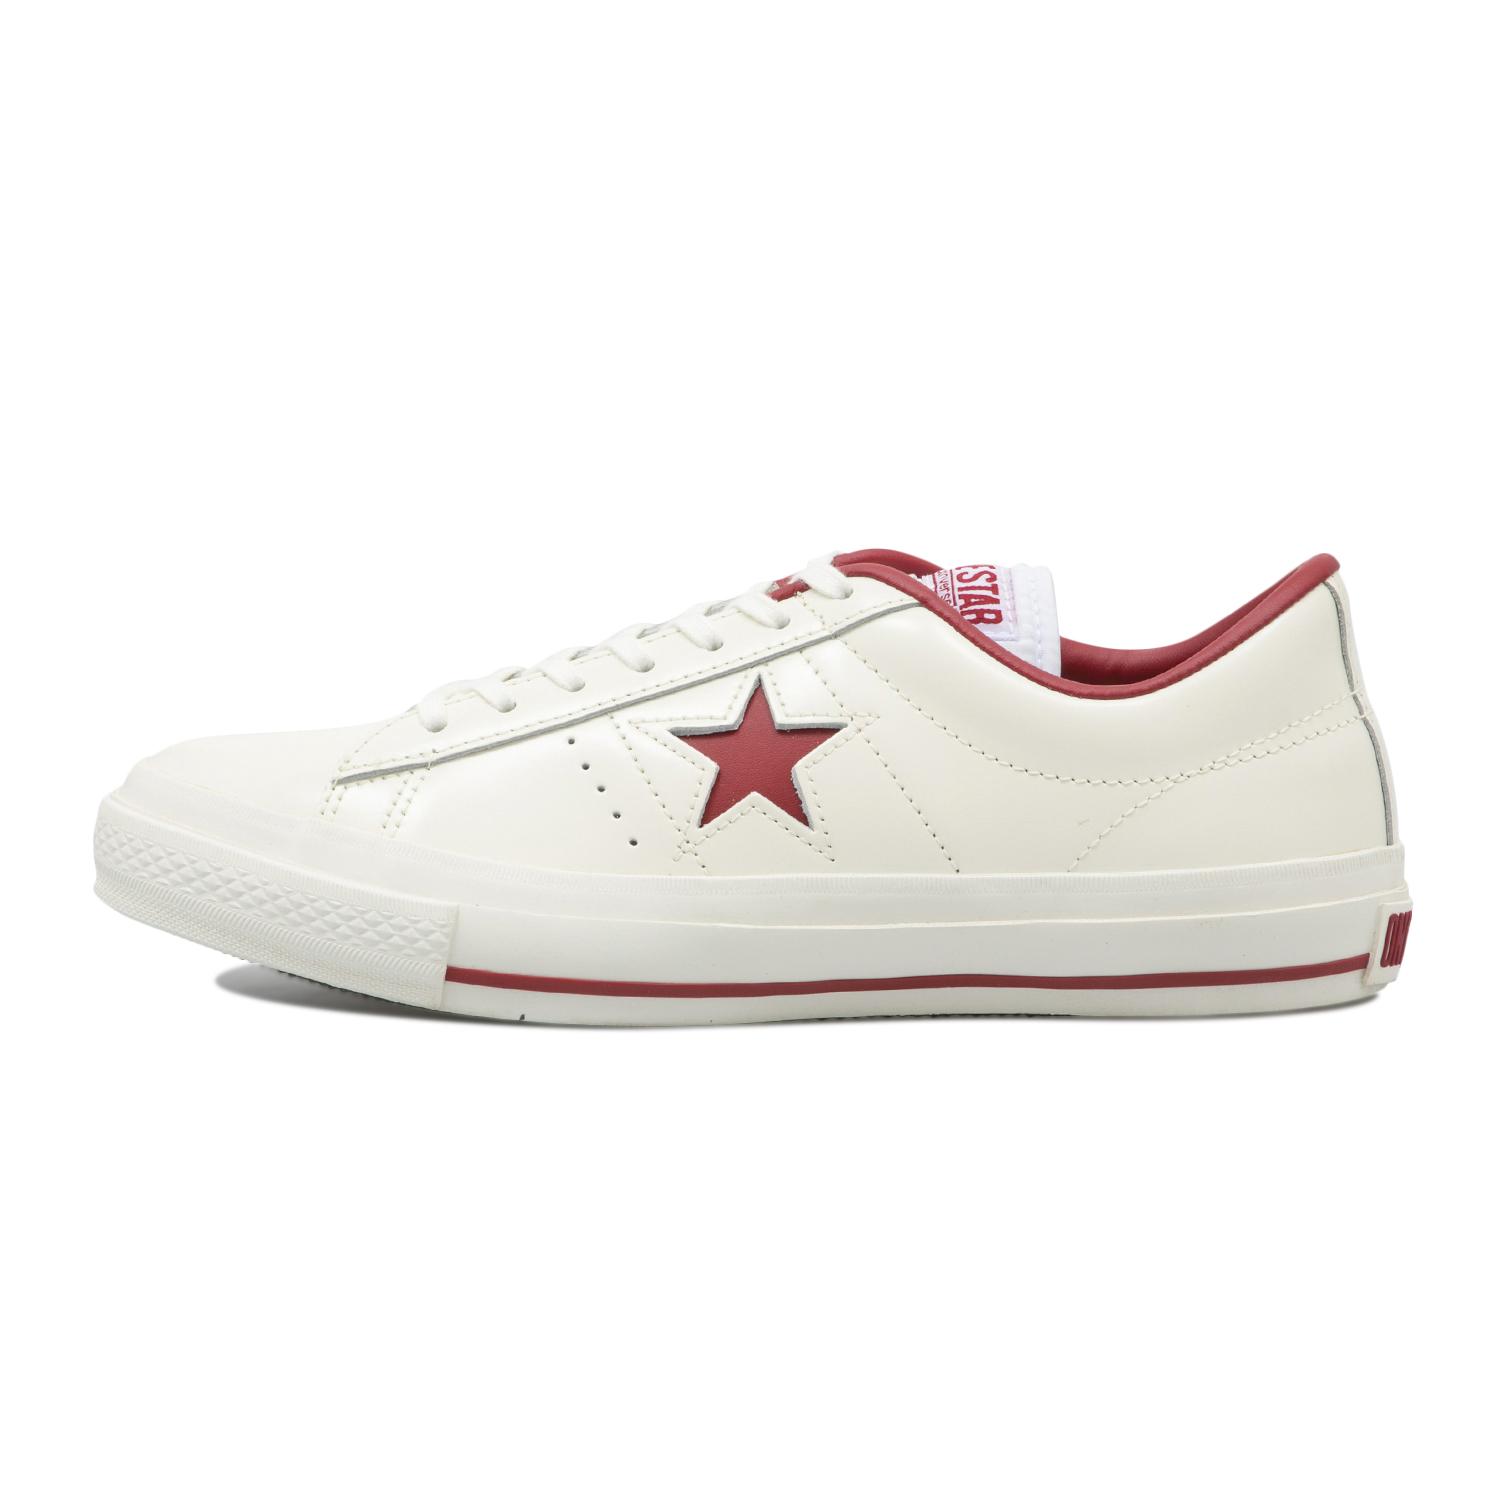 【CONVERSE】 コンバース ONE STAR(A) OX 【converse】 コンバース ONE STAR(A) O 32340282 ABC限定*WHITE/RED